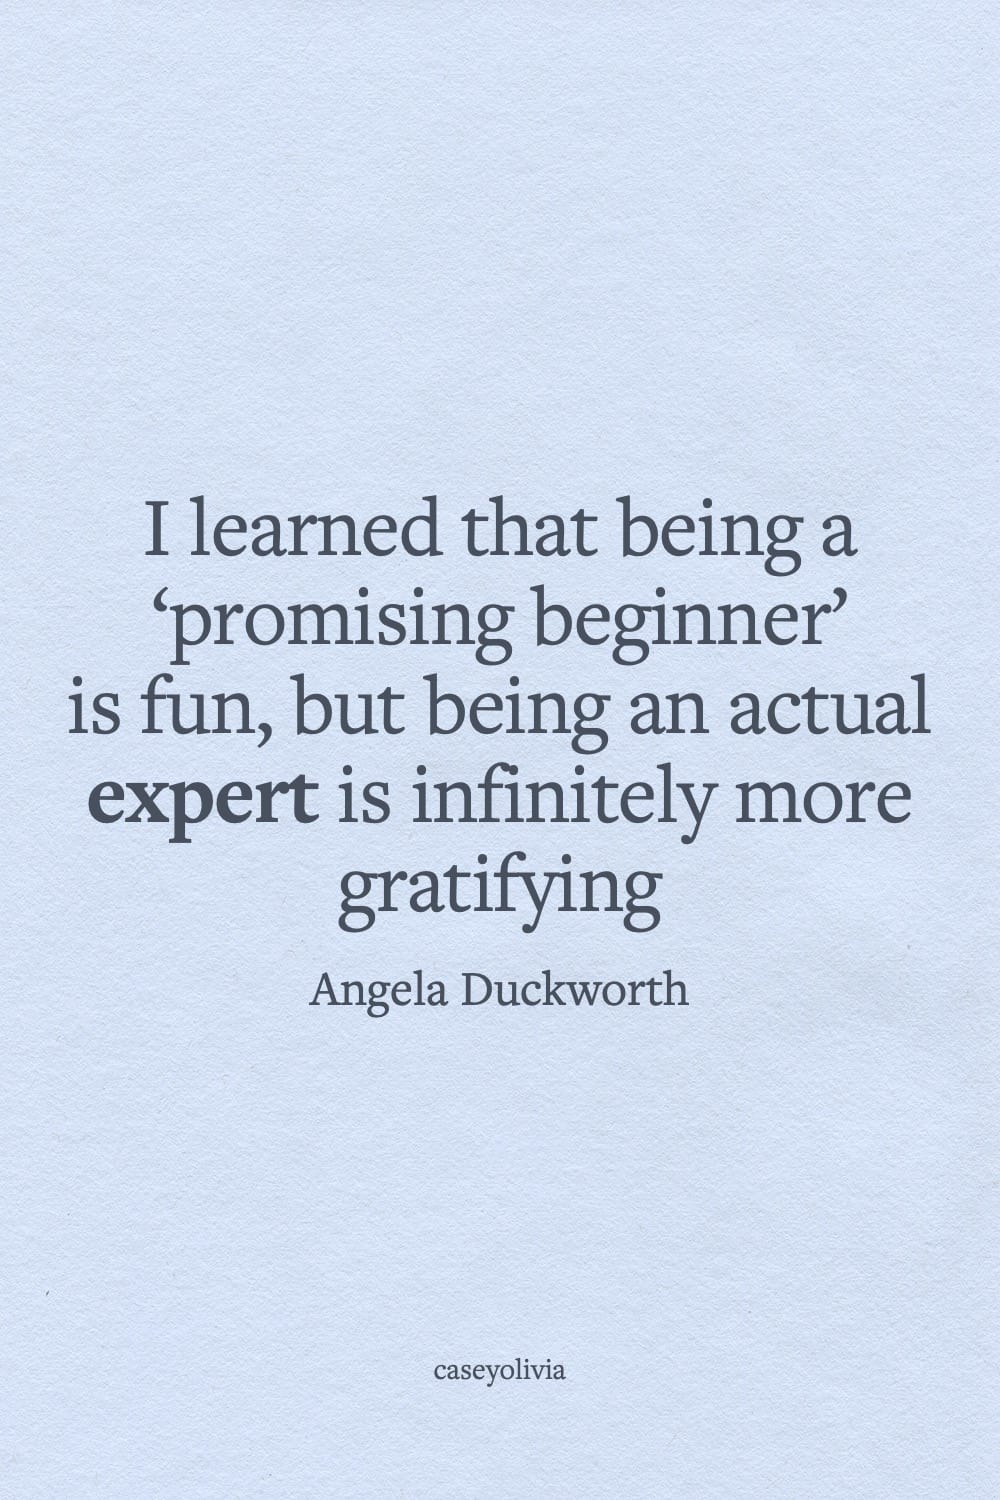 angela duckworth being an expert quotation to motivate